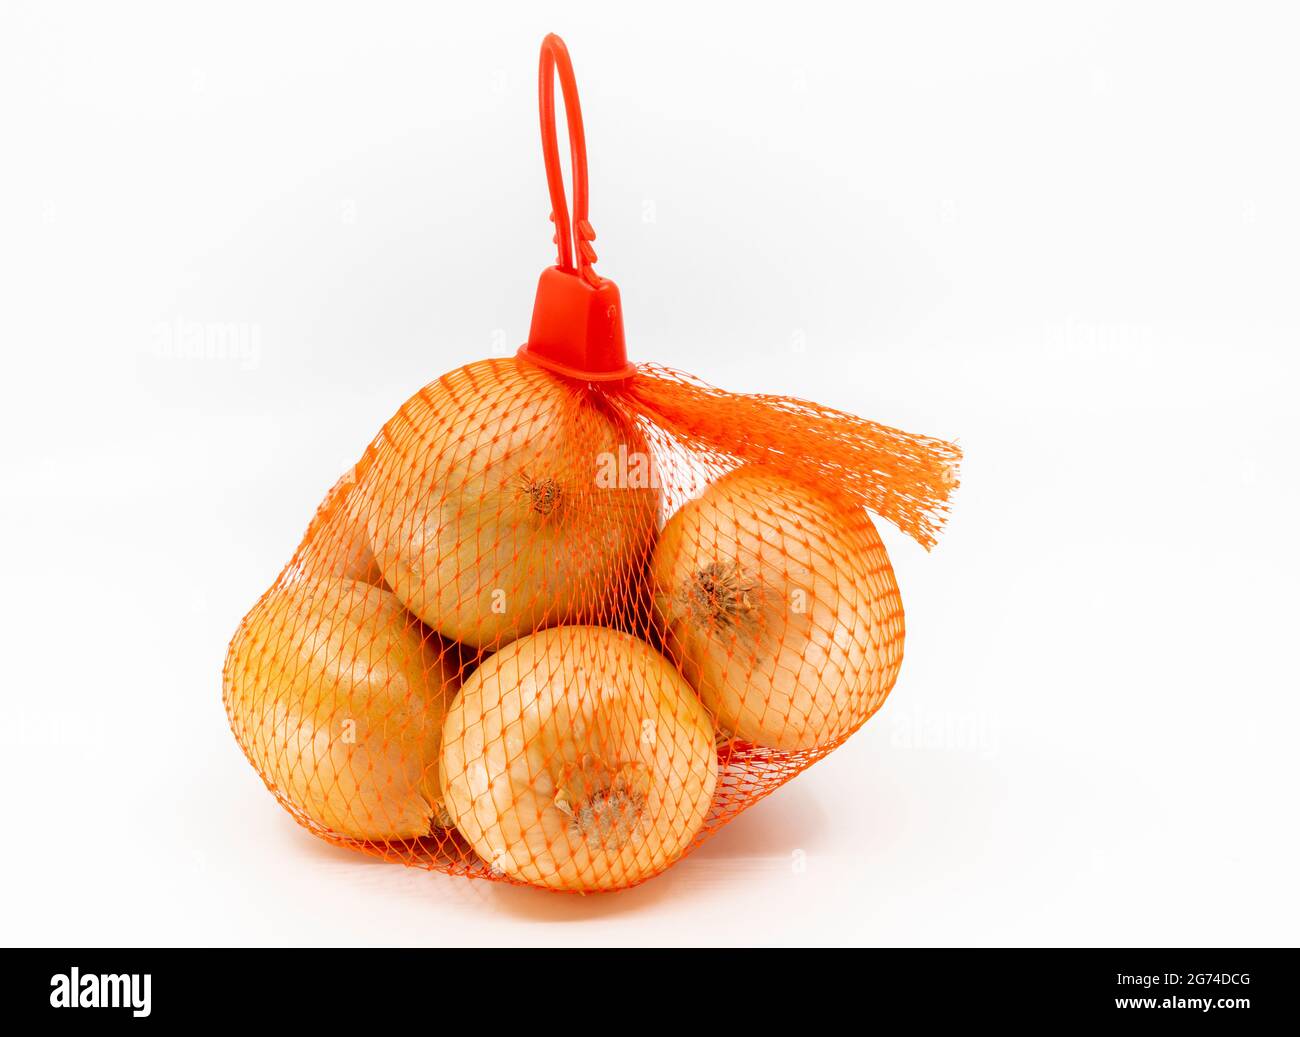 https://c8.alamy.com/comp/2G74DCG/isolated-fresh-organic-onions-in-a-red-net-bag-on-white-background-front-view-of-onion-packaging-net-bag-with-carrying-handle-2G74DCG.jpg